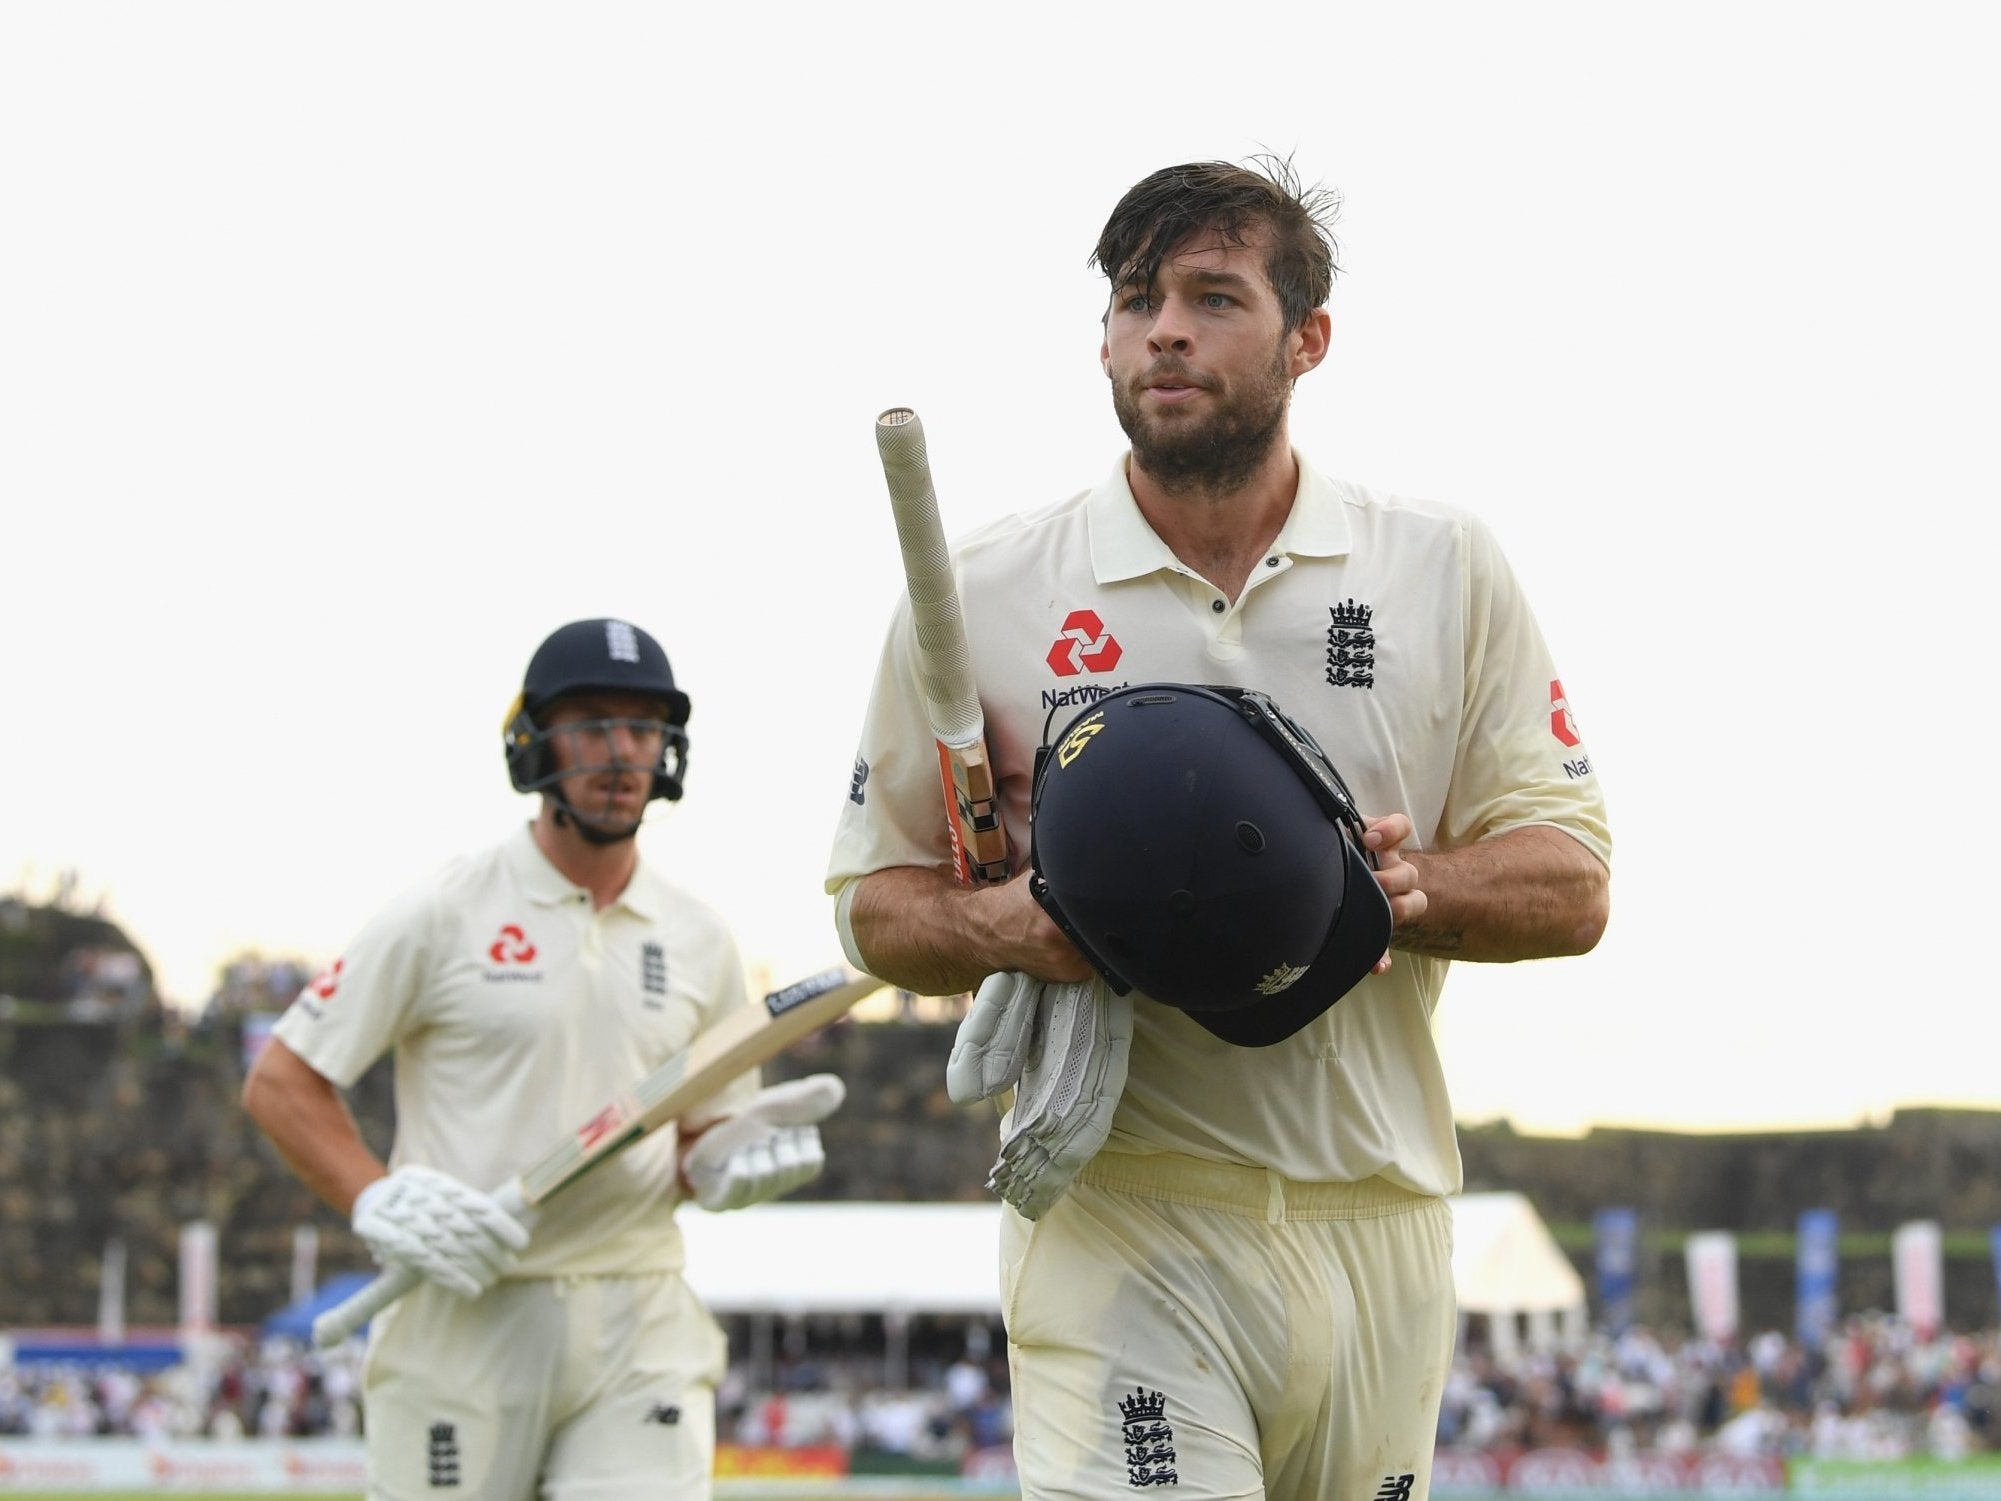 Ben Foakes has been recalled to the England Test squad for the tour of Sri Lanka